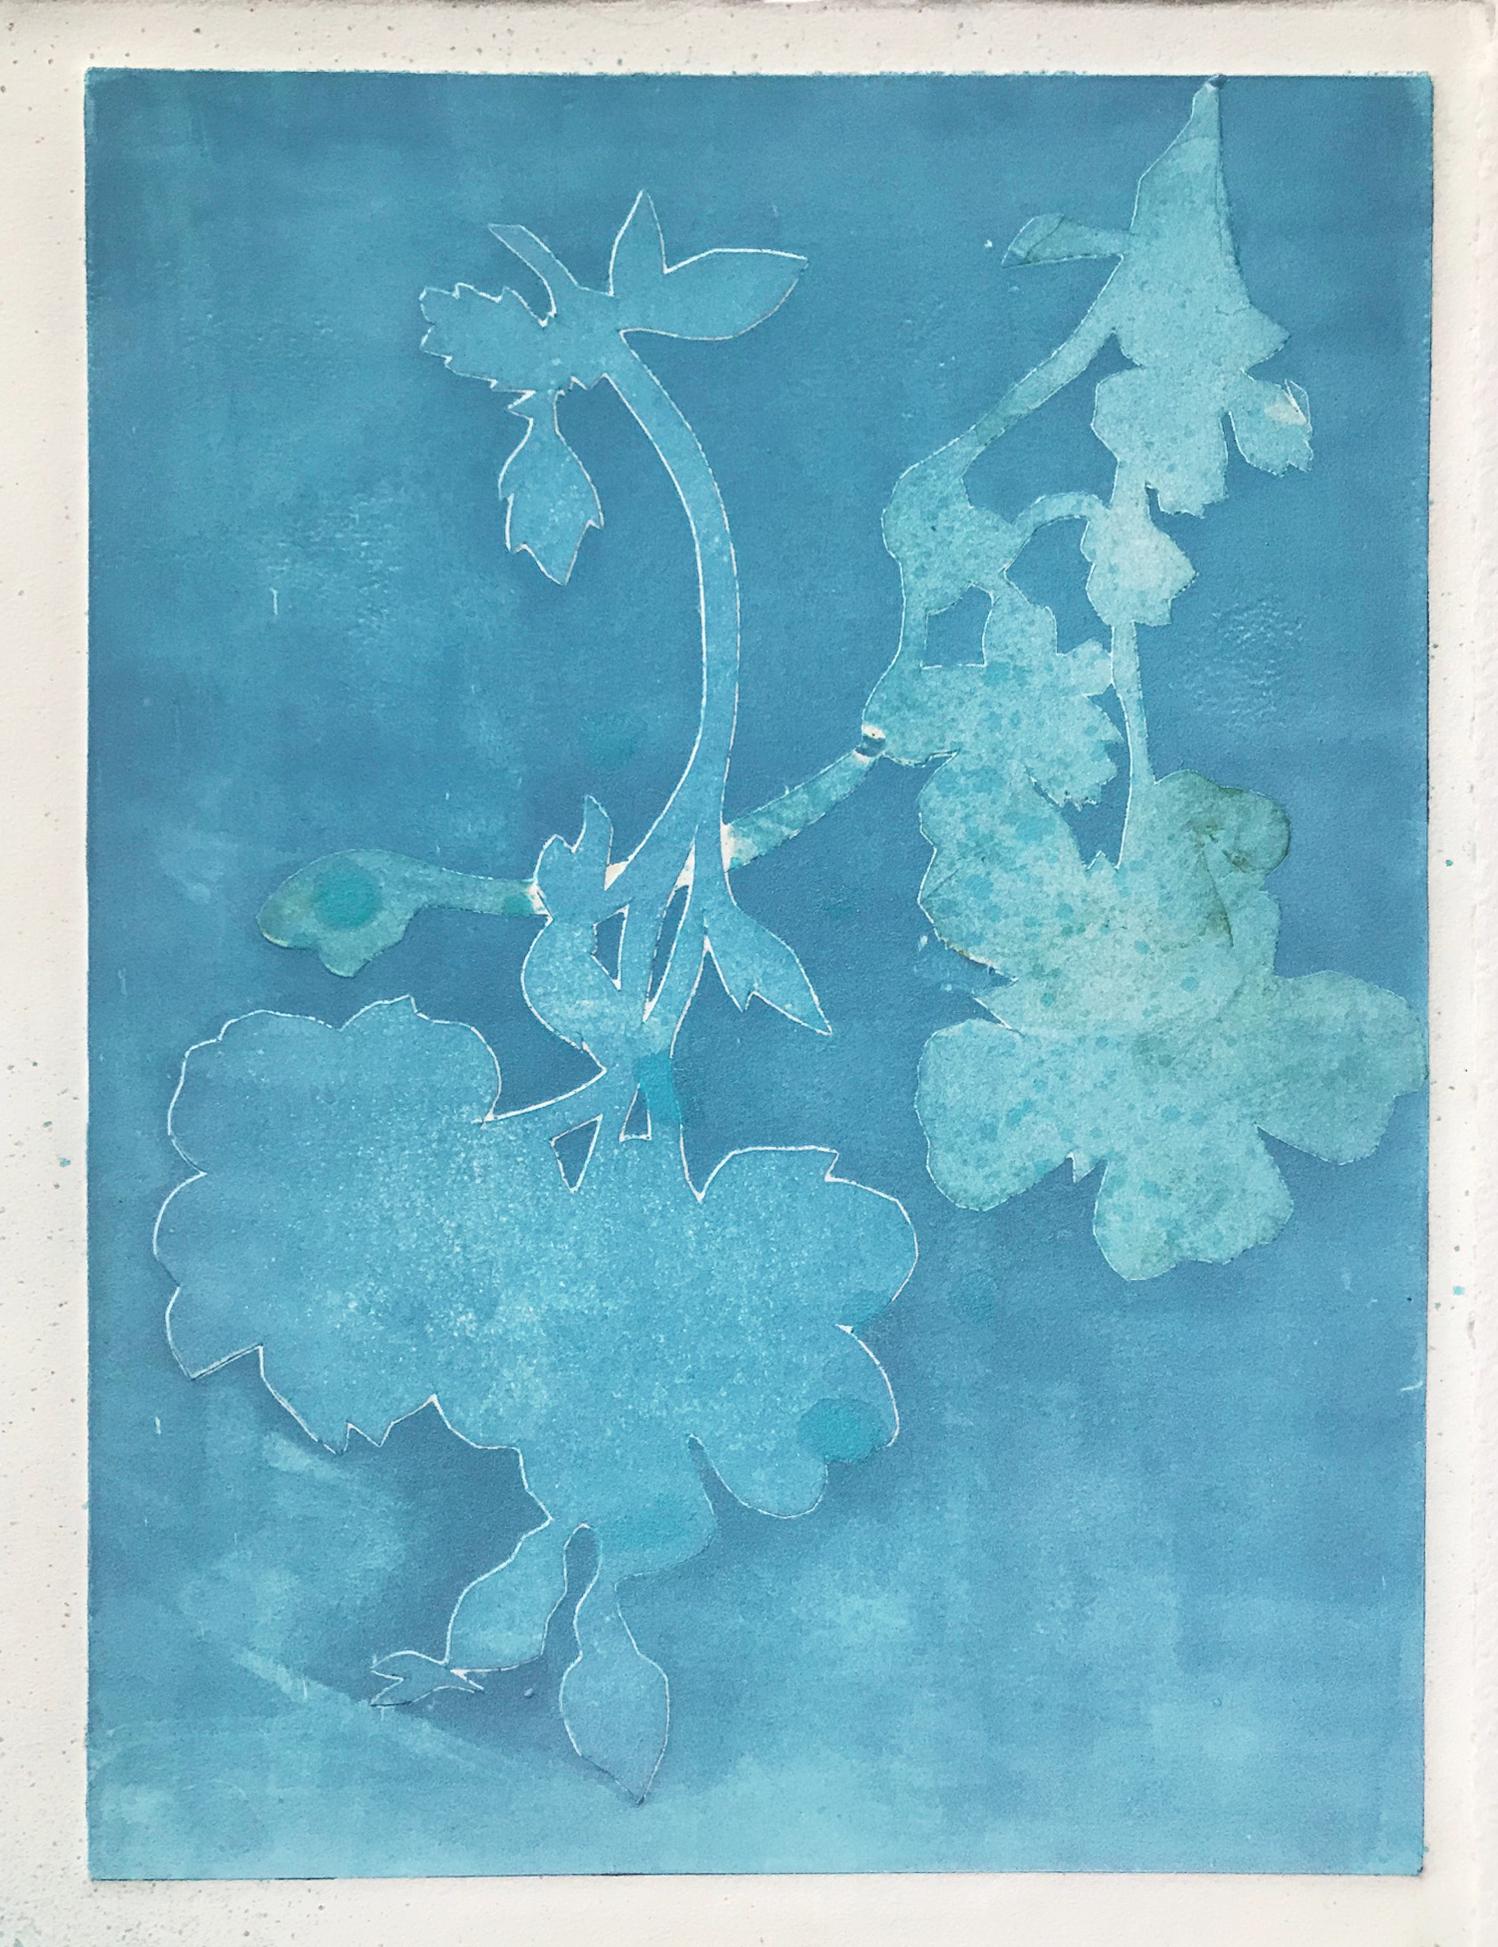 Flower Shadows I, 12 individual floral monotypes together in a grid 13